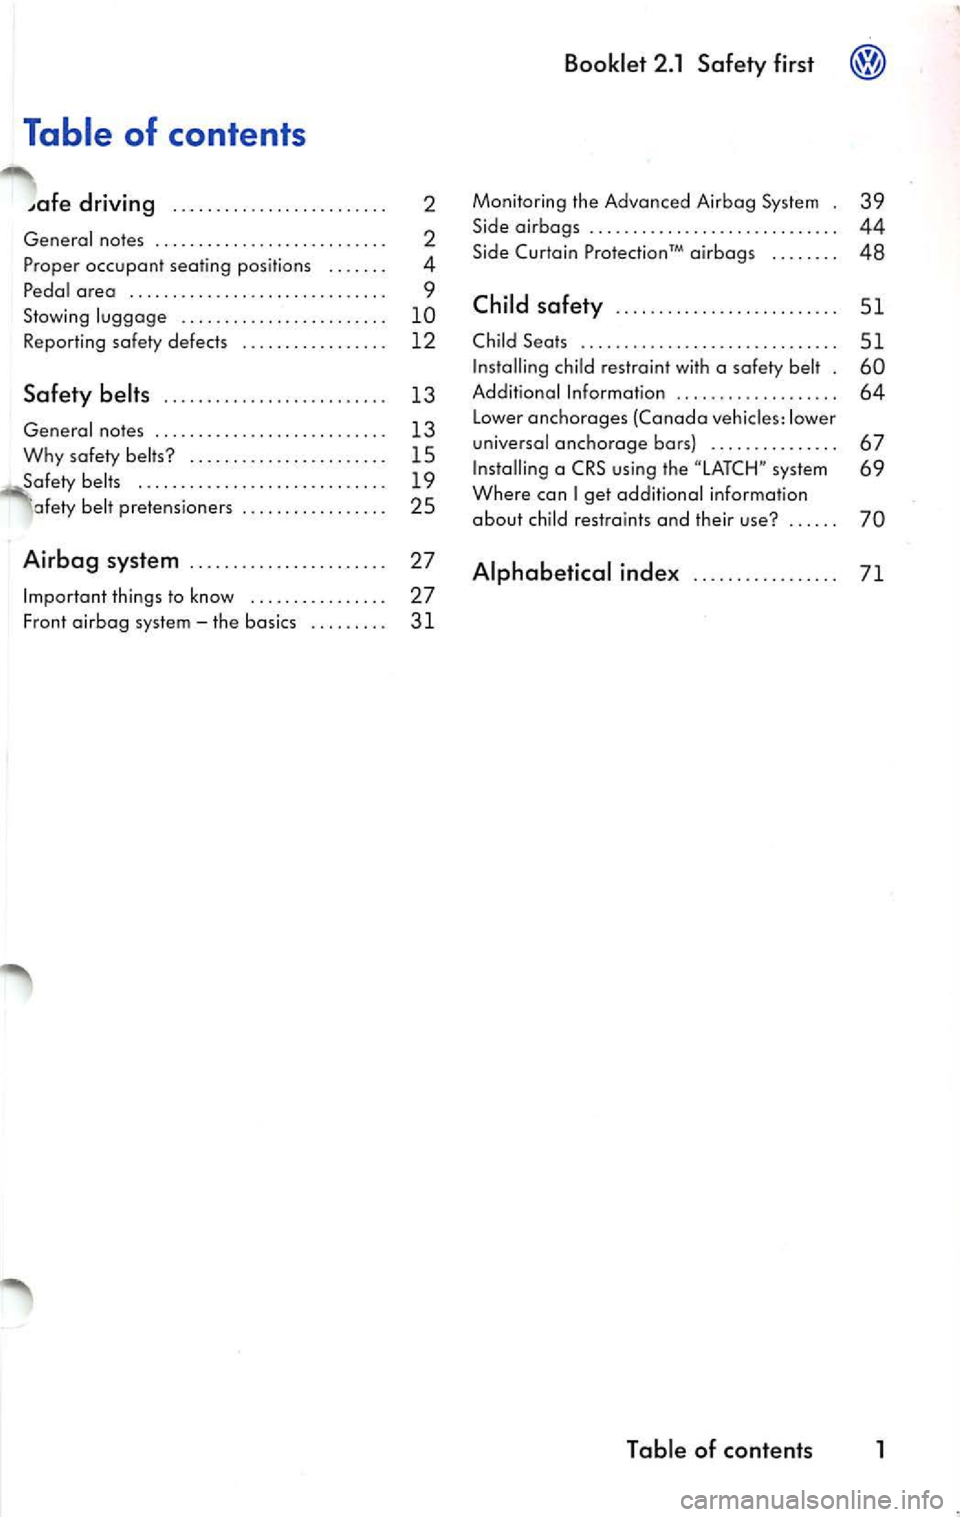 VOLKSWAGEN JETTA 2010  Owners Manual Table  of  contents 
driving . .  . . . .  .  . .  . .  . .  . . .  . . . . . .  . . . 2 
General  notes  . . . .  . . . .  . . . . .  . . .  . . .  .  . . . .  . .  .  2 
Pr oper  occupant  seating  